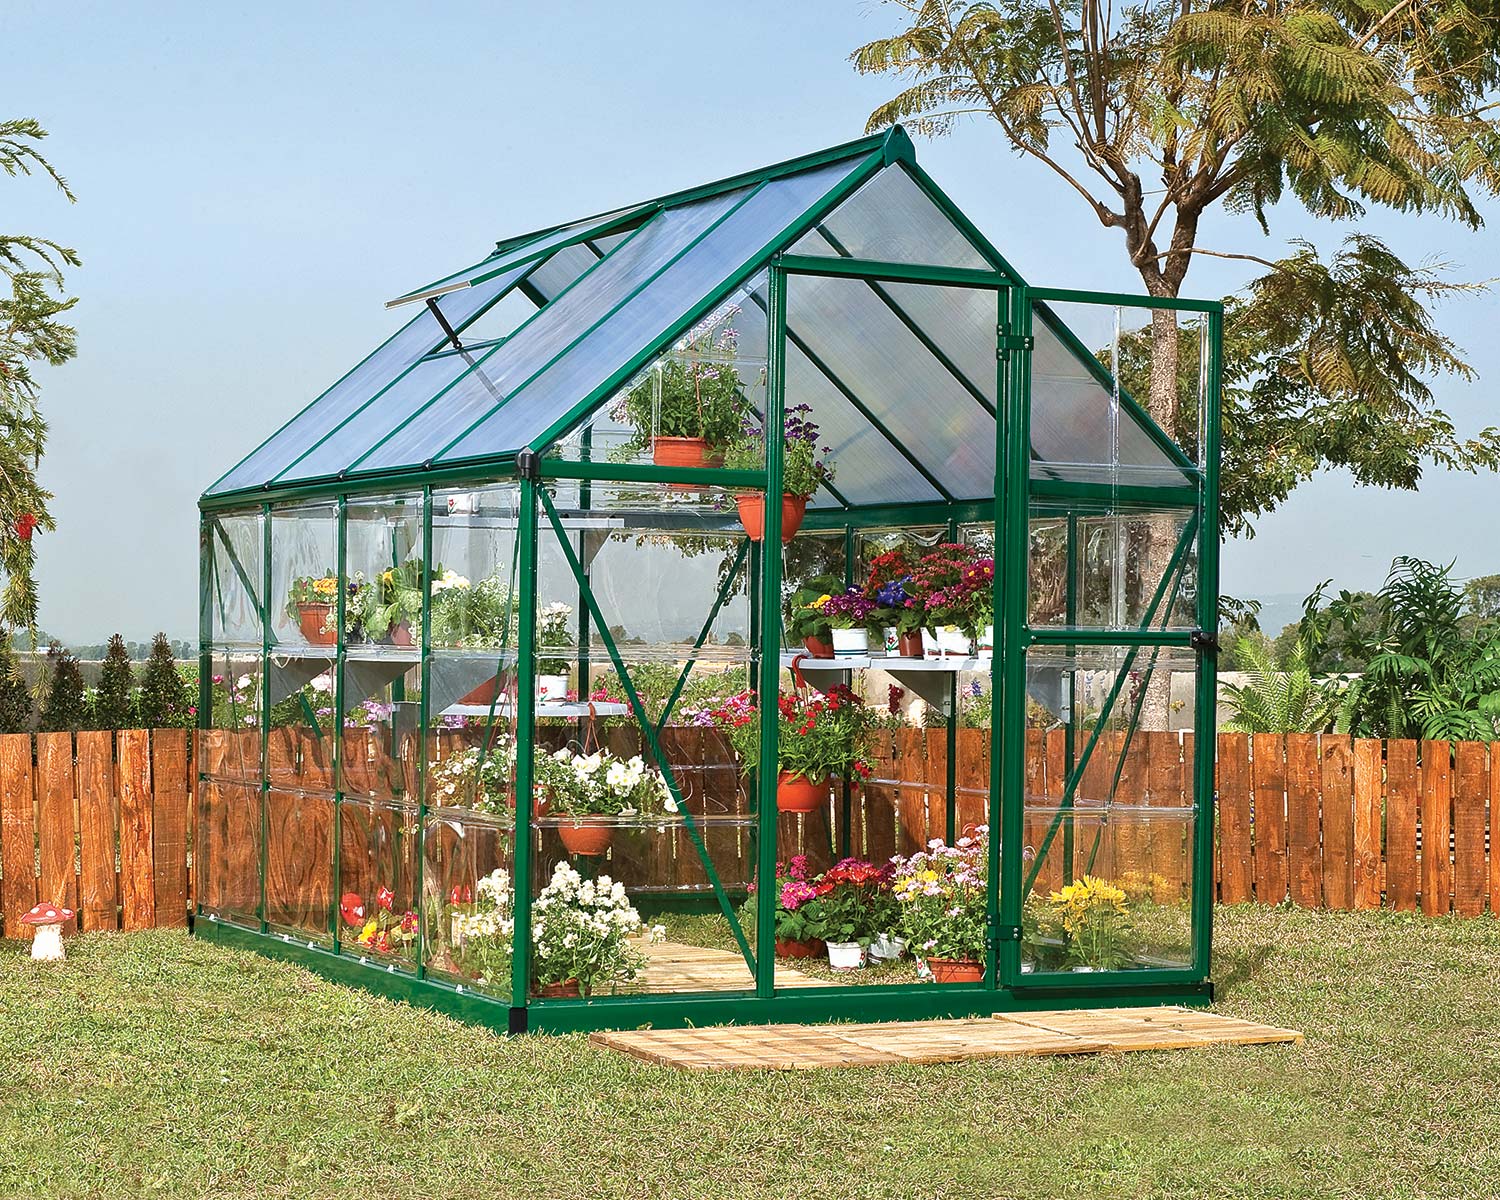 A photo of a polycarbonate greenhouse